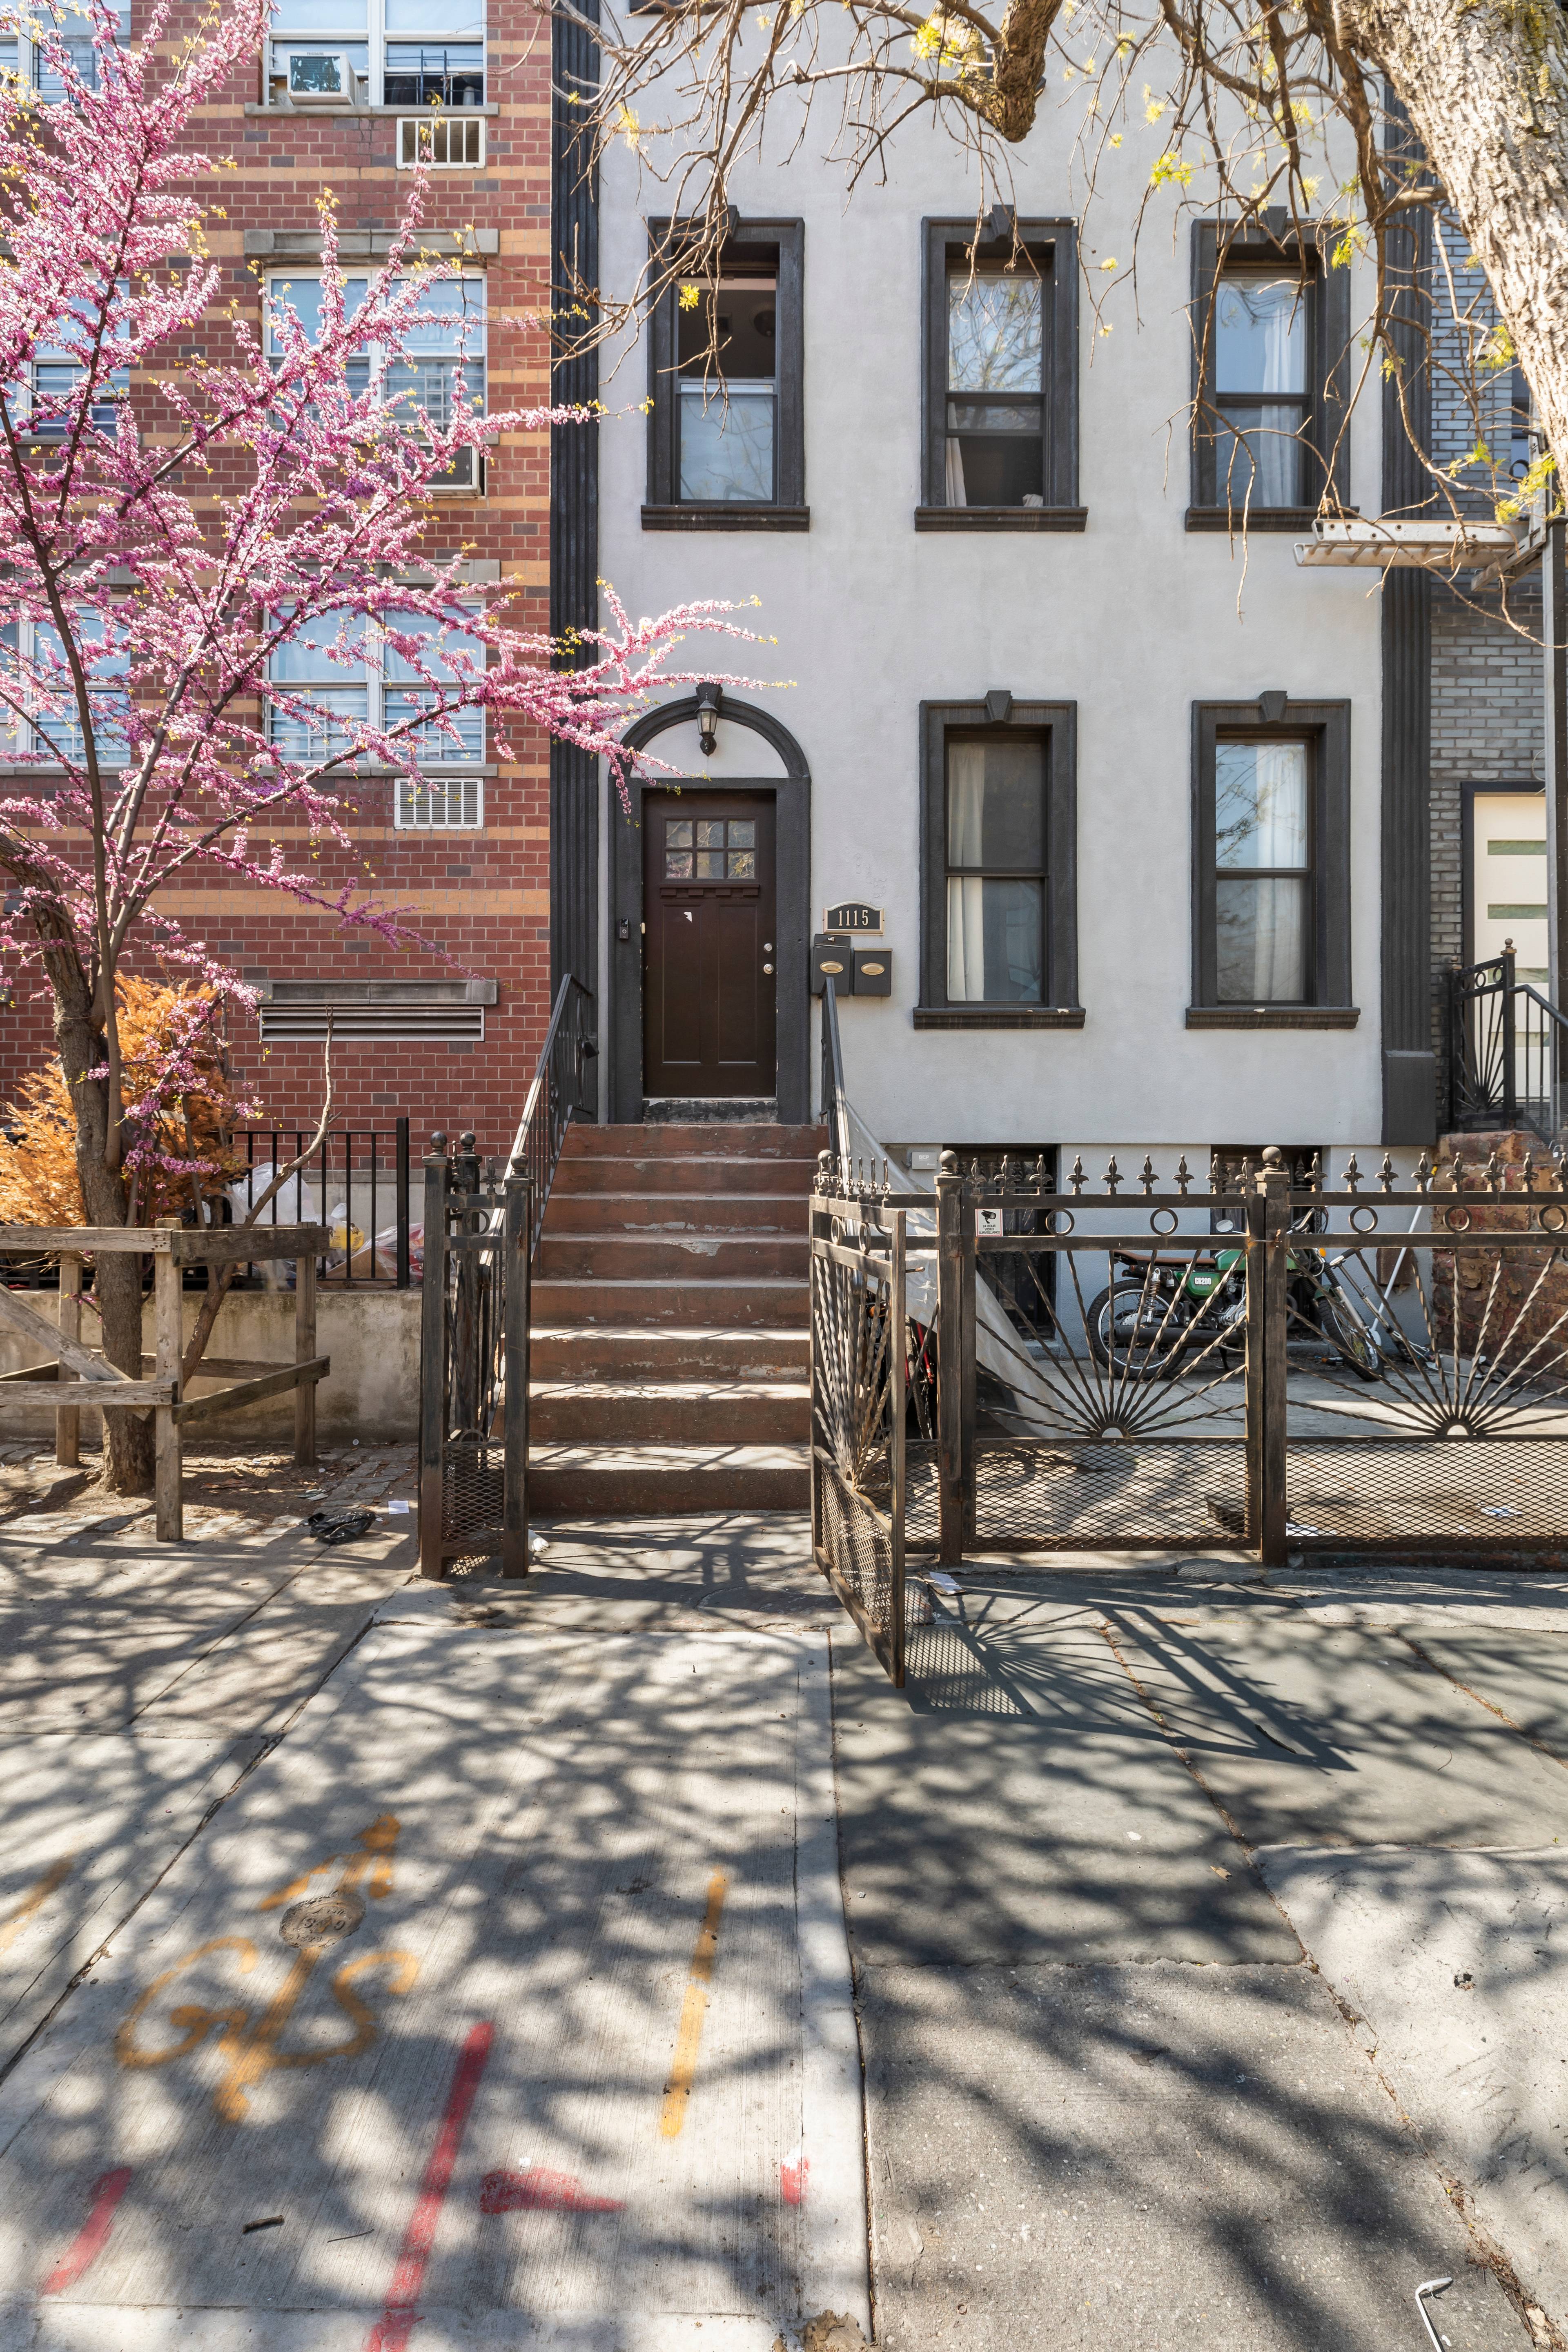 Located in the heart of Bushwick, there is opportunity knocking for you to own this townhouse, which is offering the option to have an income generating asset with tenants currently ...